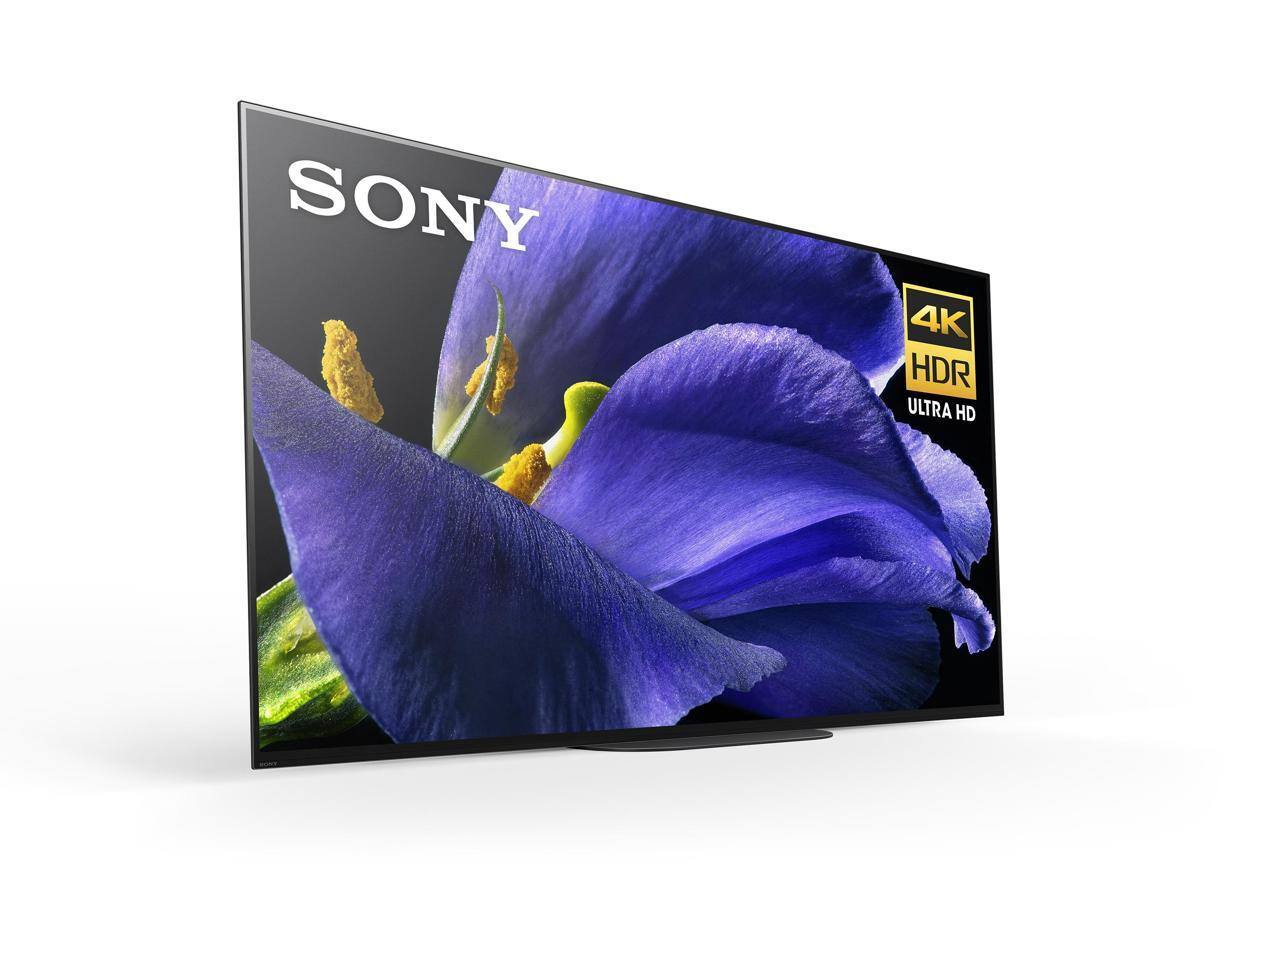 Sony XBR-65A9G Master Series 65" 4K Ultra High Definition Smart OLED TV (2020) for $2199